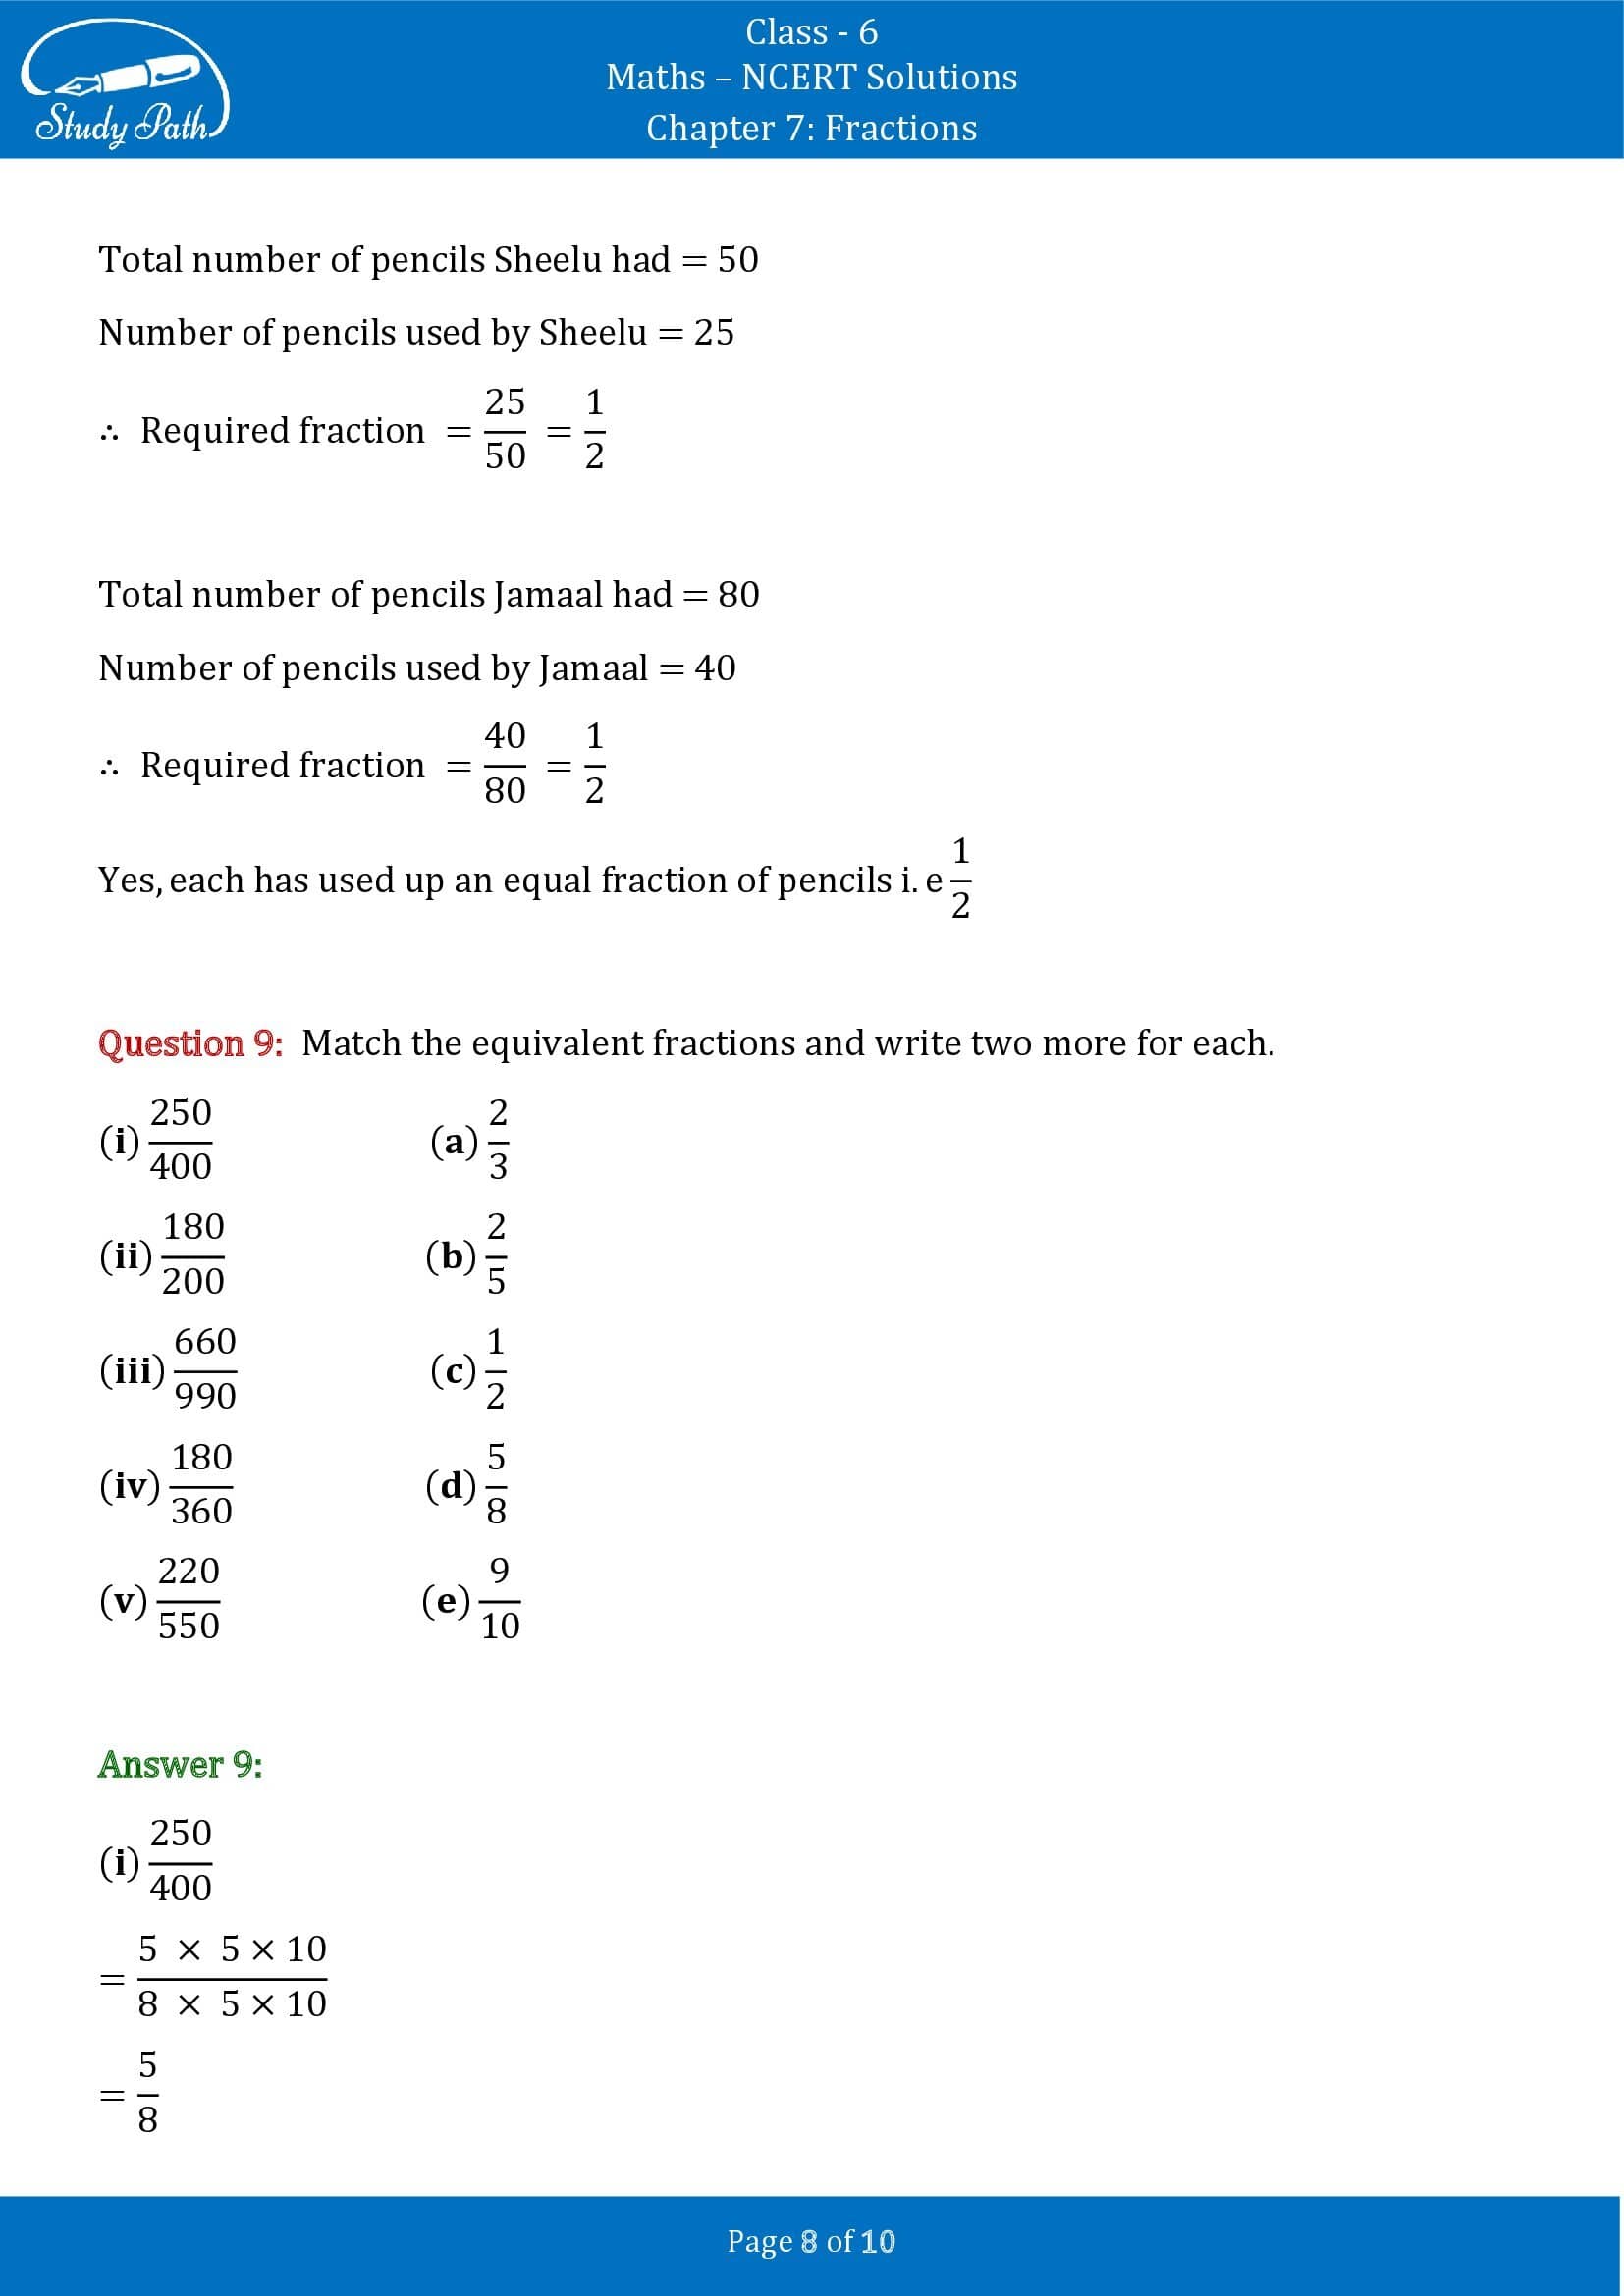 NCERT Solutions for Class 6 Maths Chapter 7 Fractions Exercise 7.3 00008